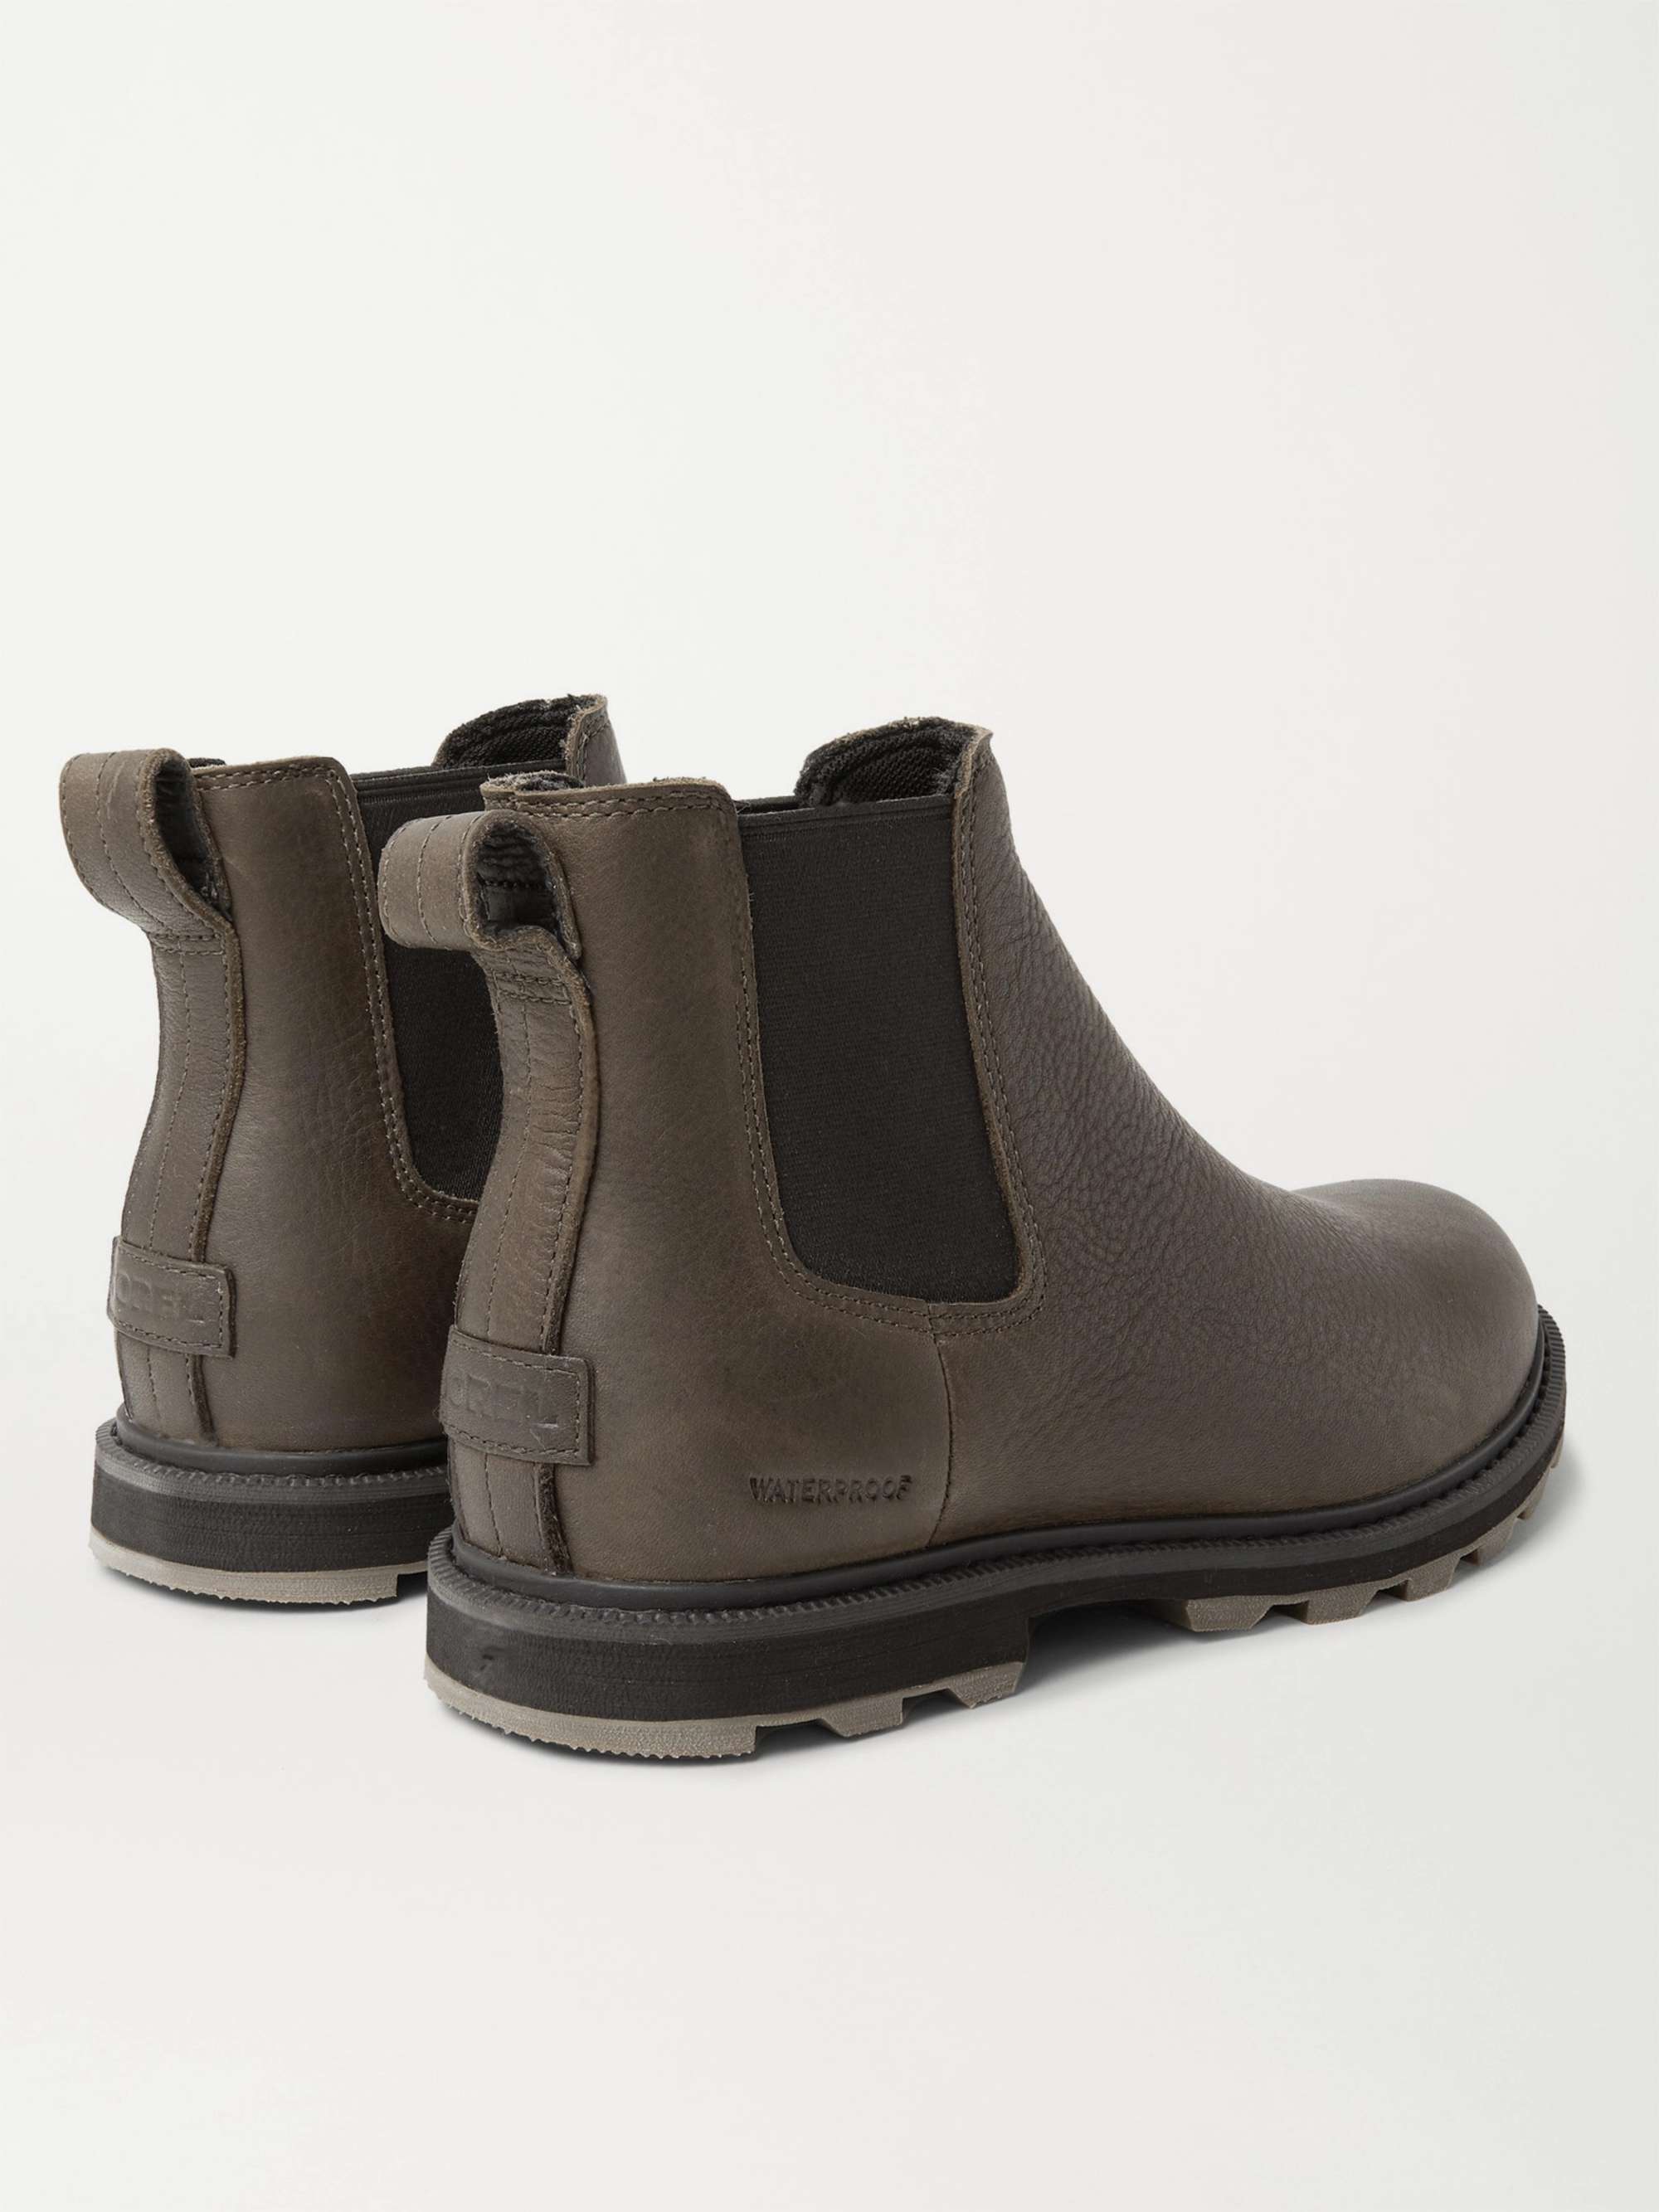 SOREL Madson II Burnished Textured-Leather Chelsea Boots